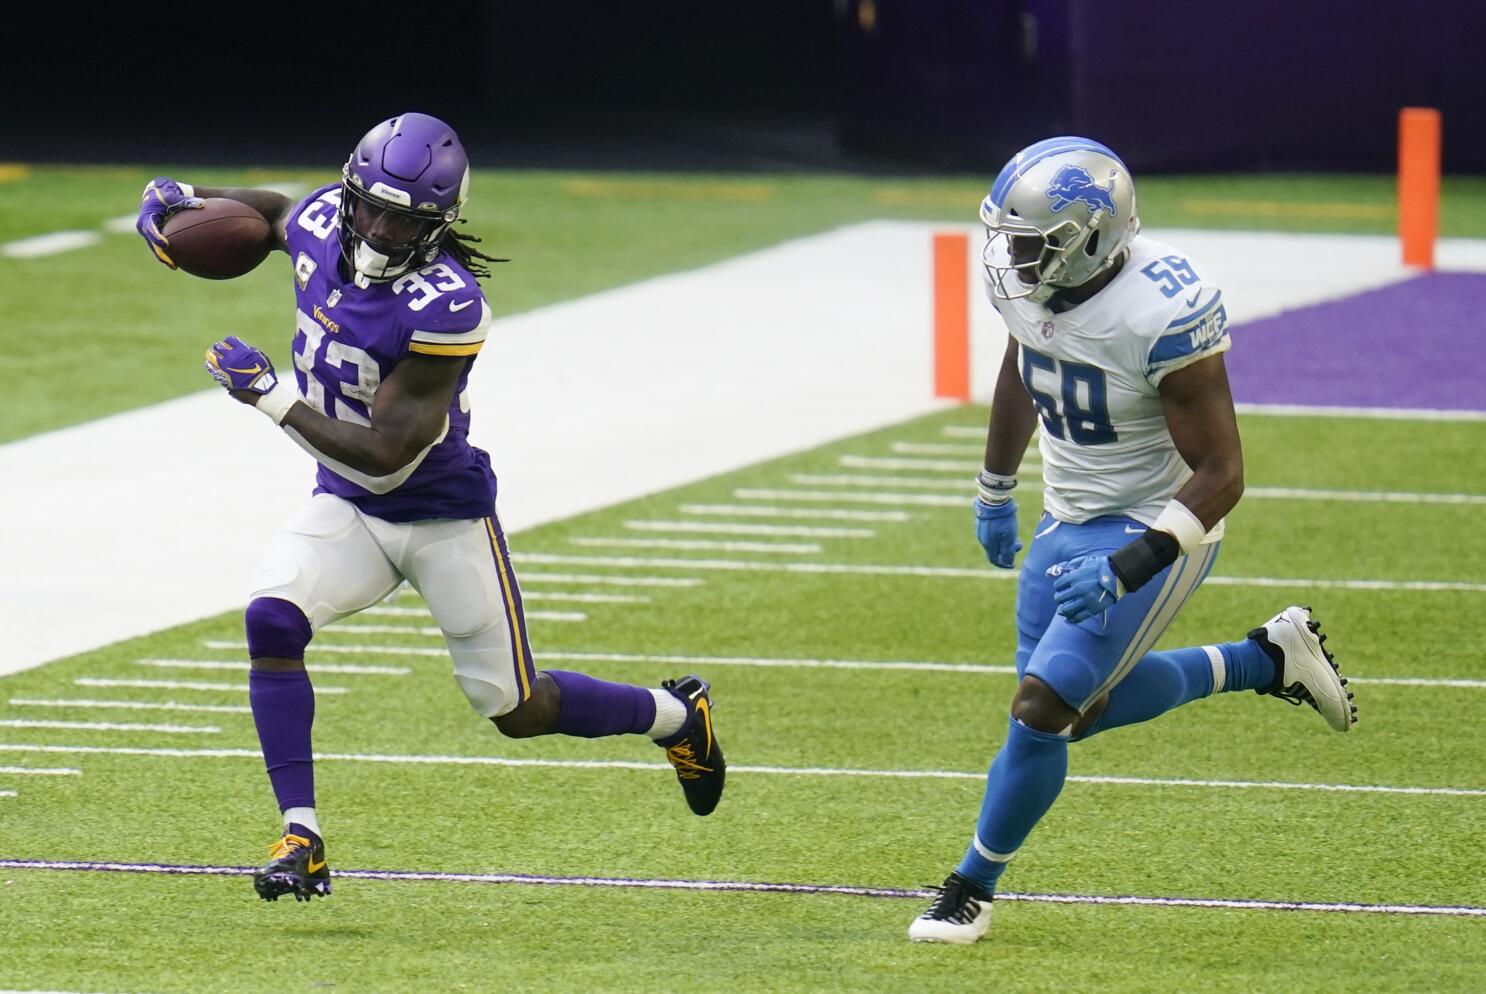 Cook hasn't broken stride despite early stumble by Vikings - The